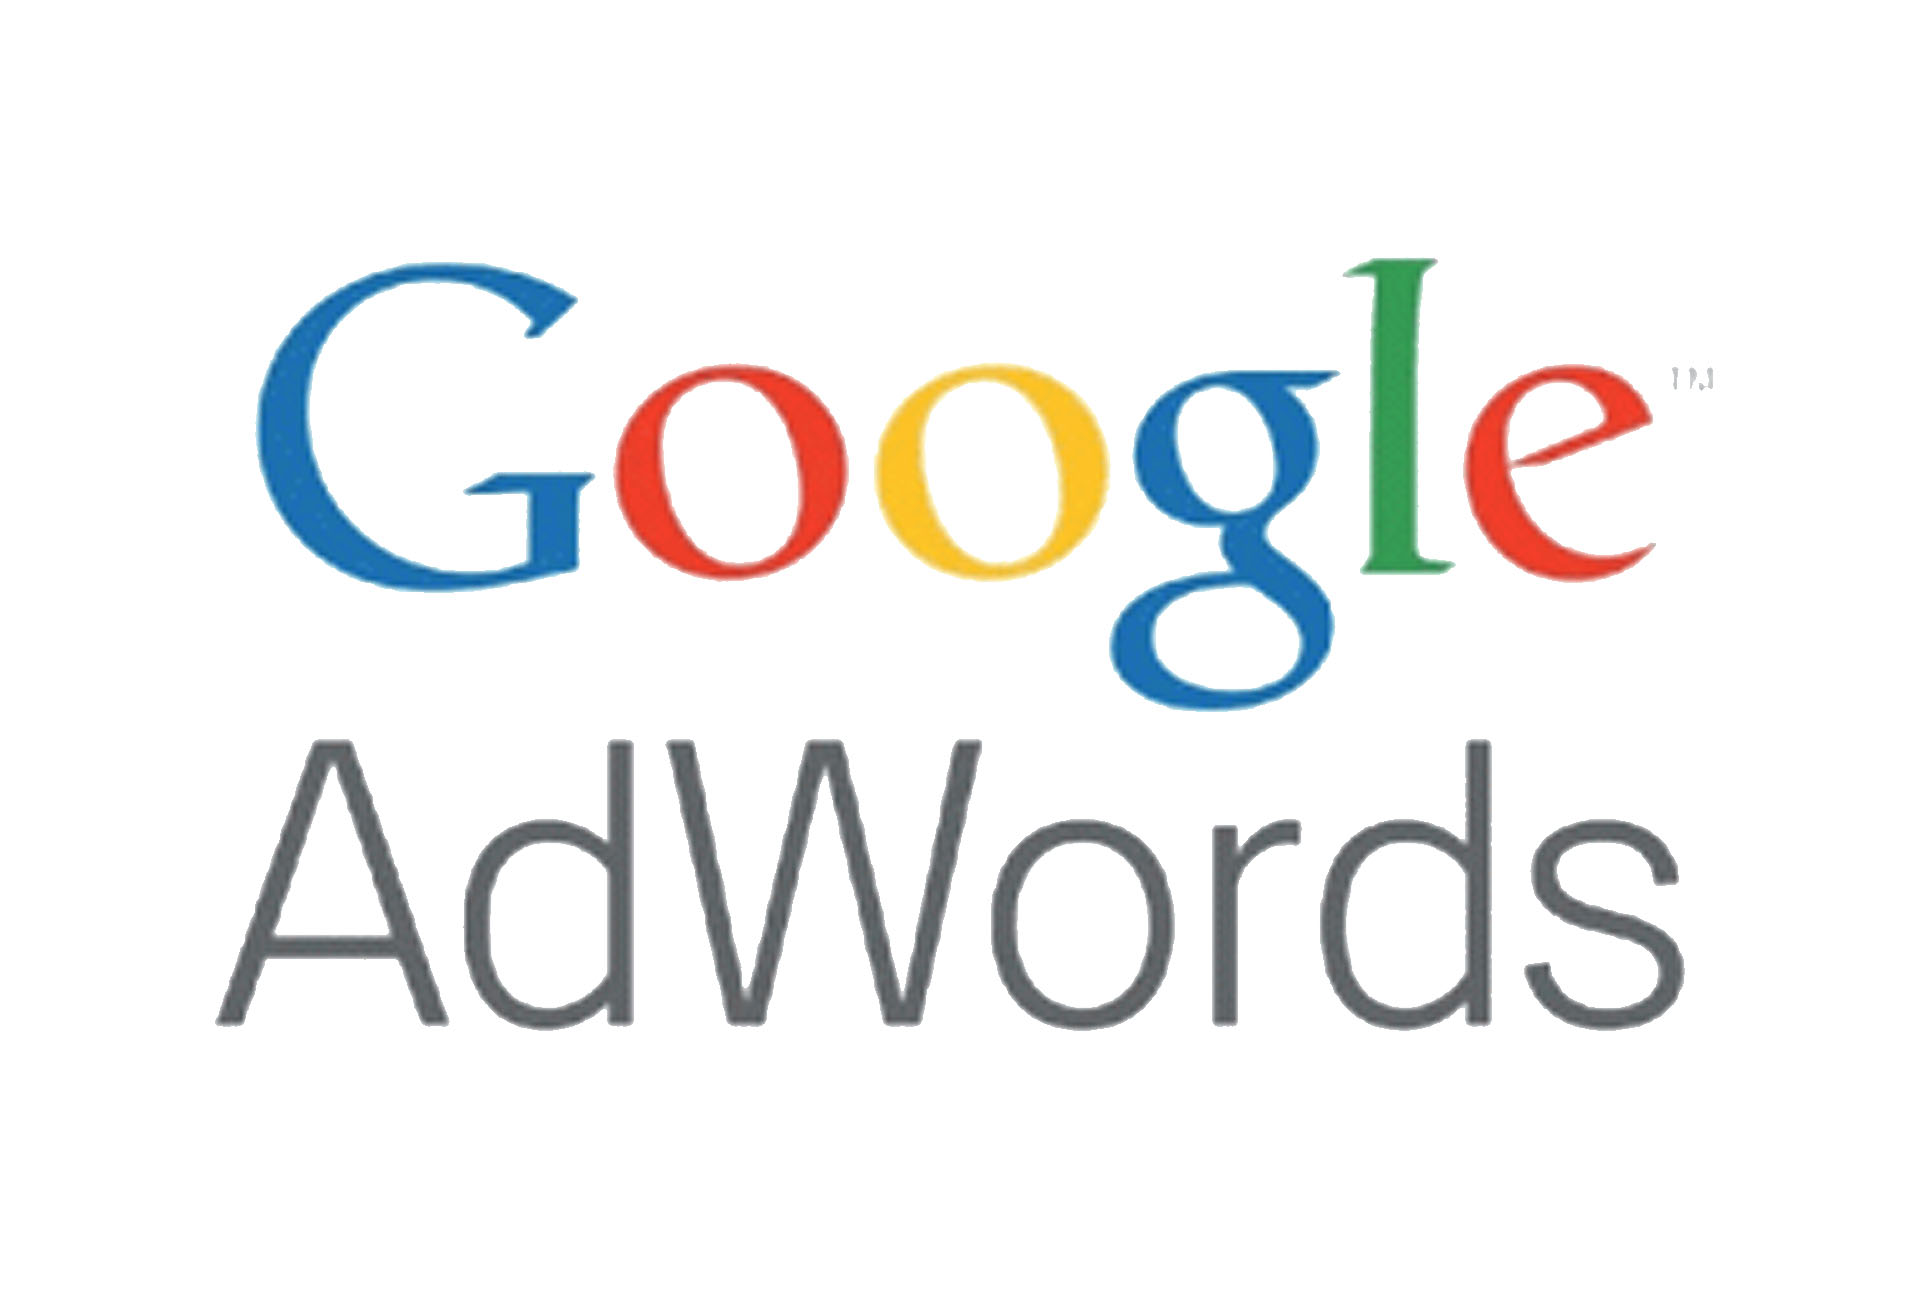 Australia’s High Court rules in favor of Google in AdWords case 